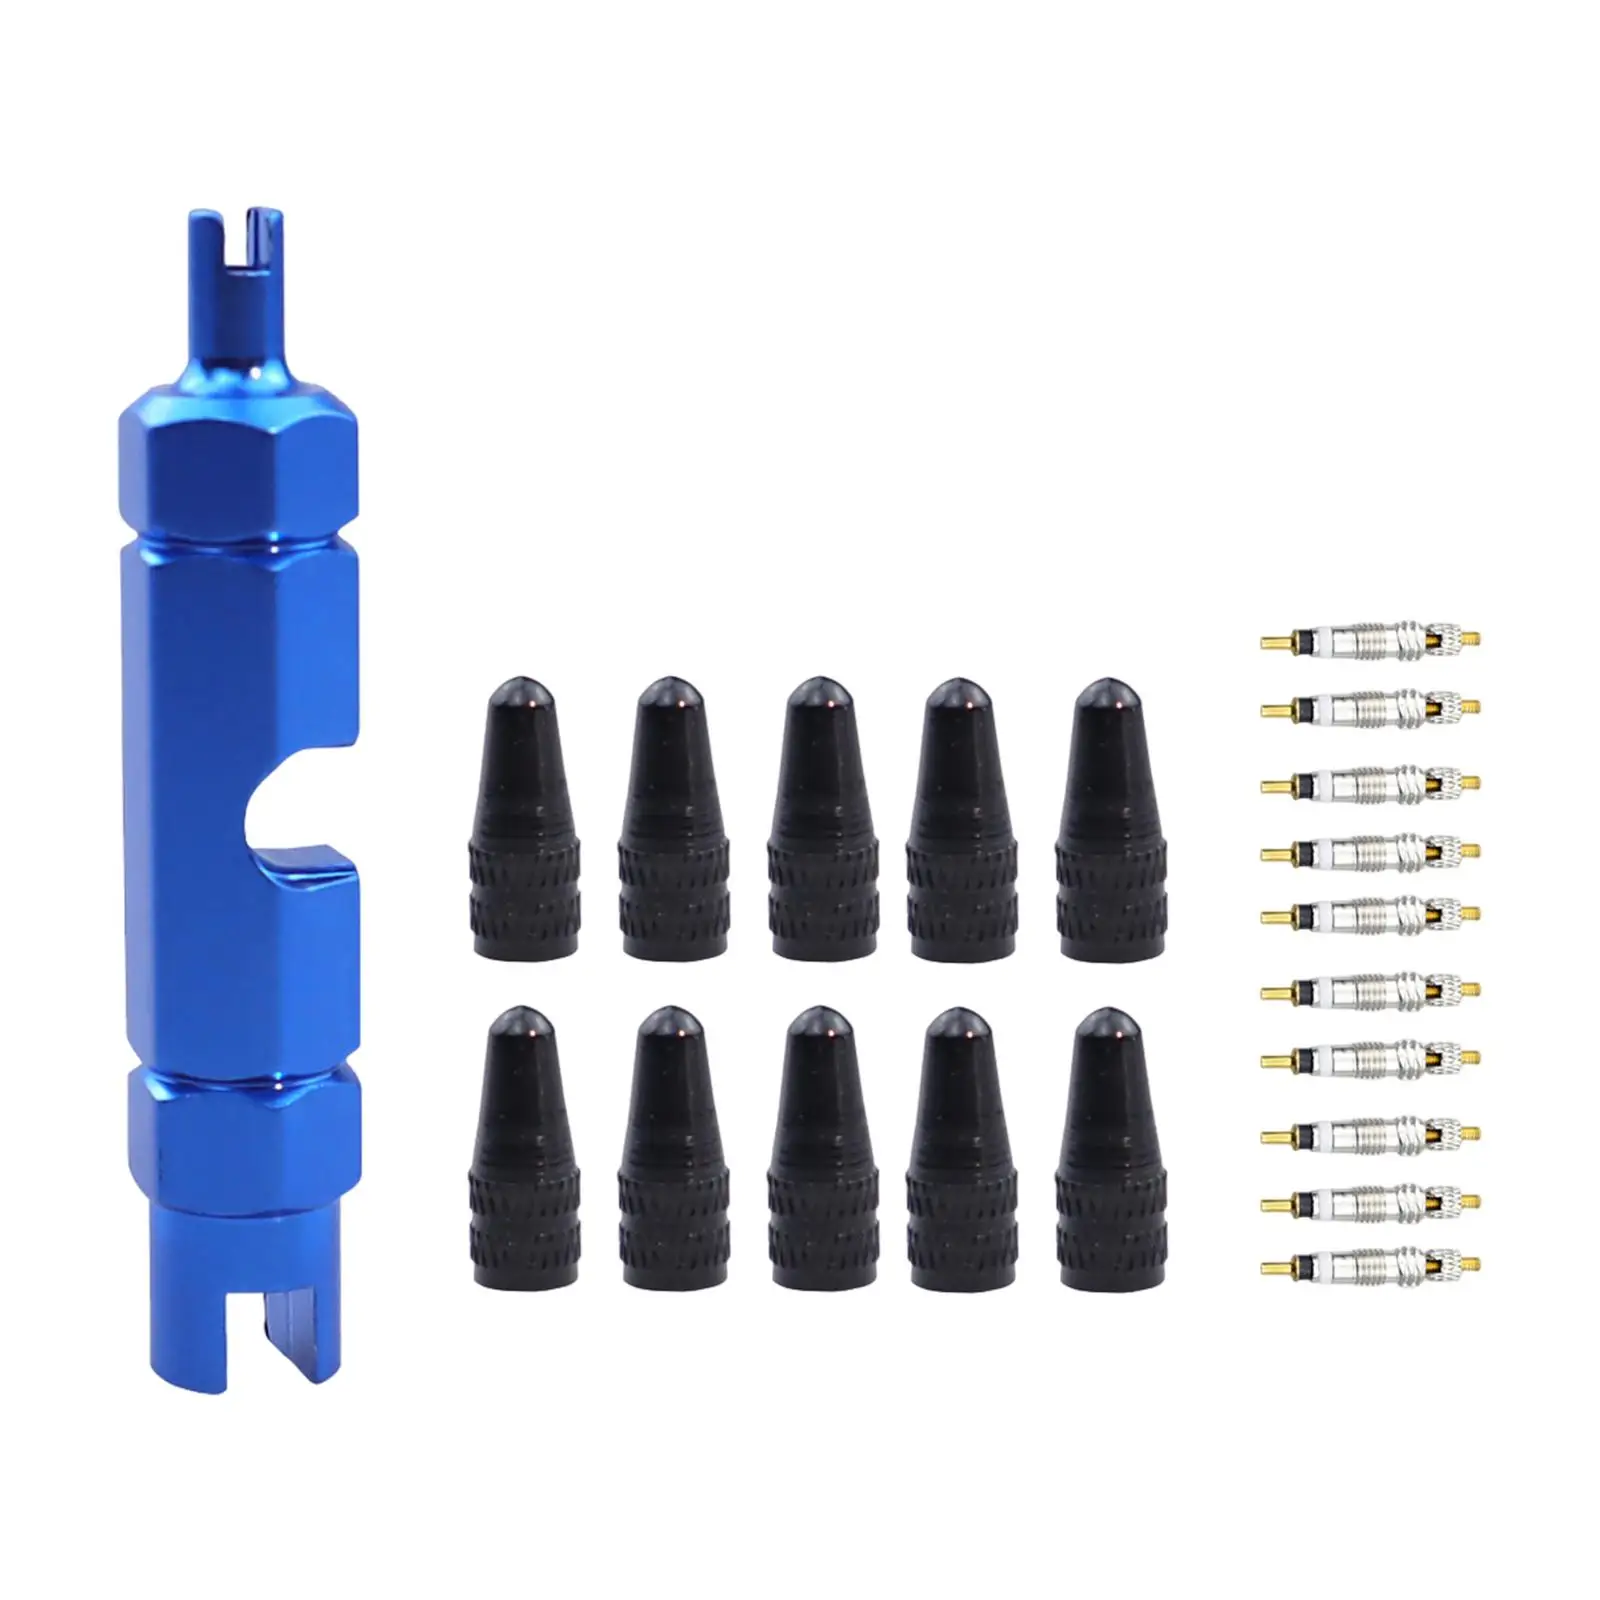 Tire Valve Stem Removal Tool Kit Single Head Valve Core Remover Motorcycle Truck Spare Parts Good Performance Valve Cores